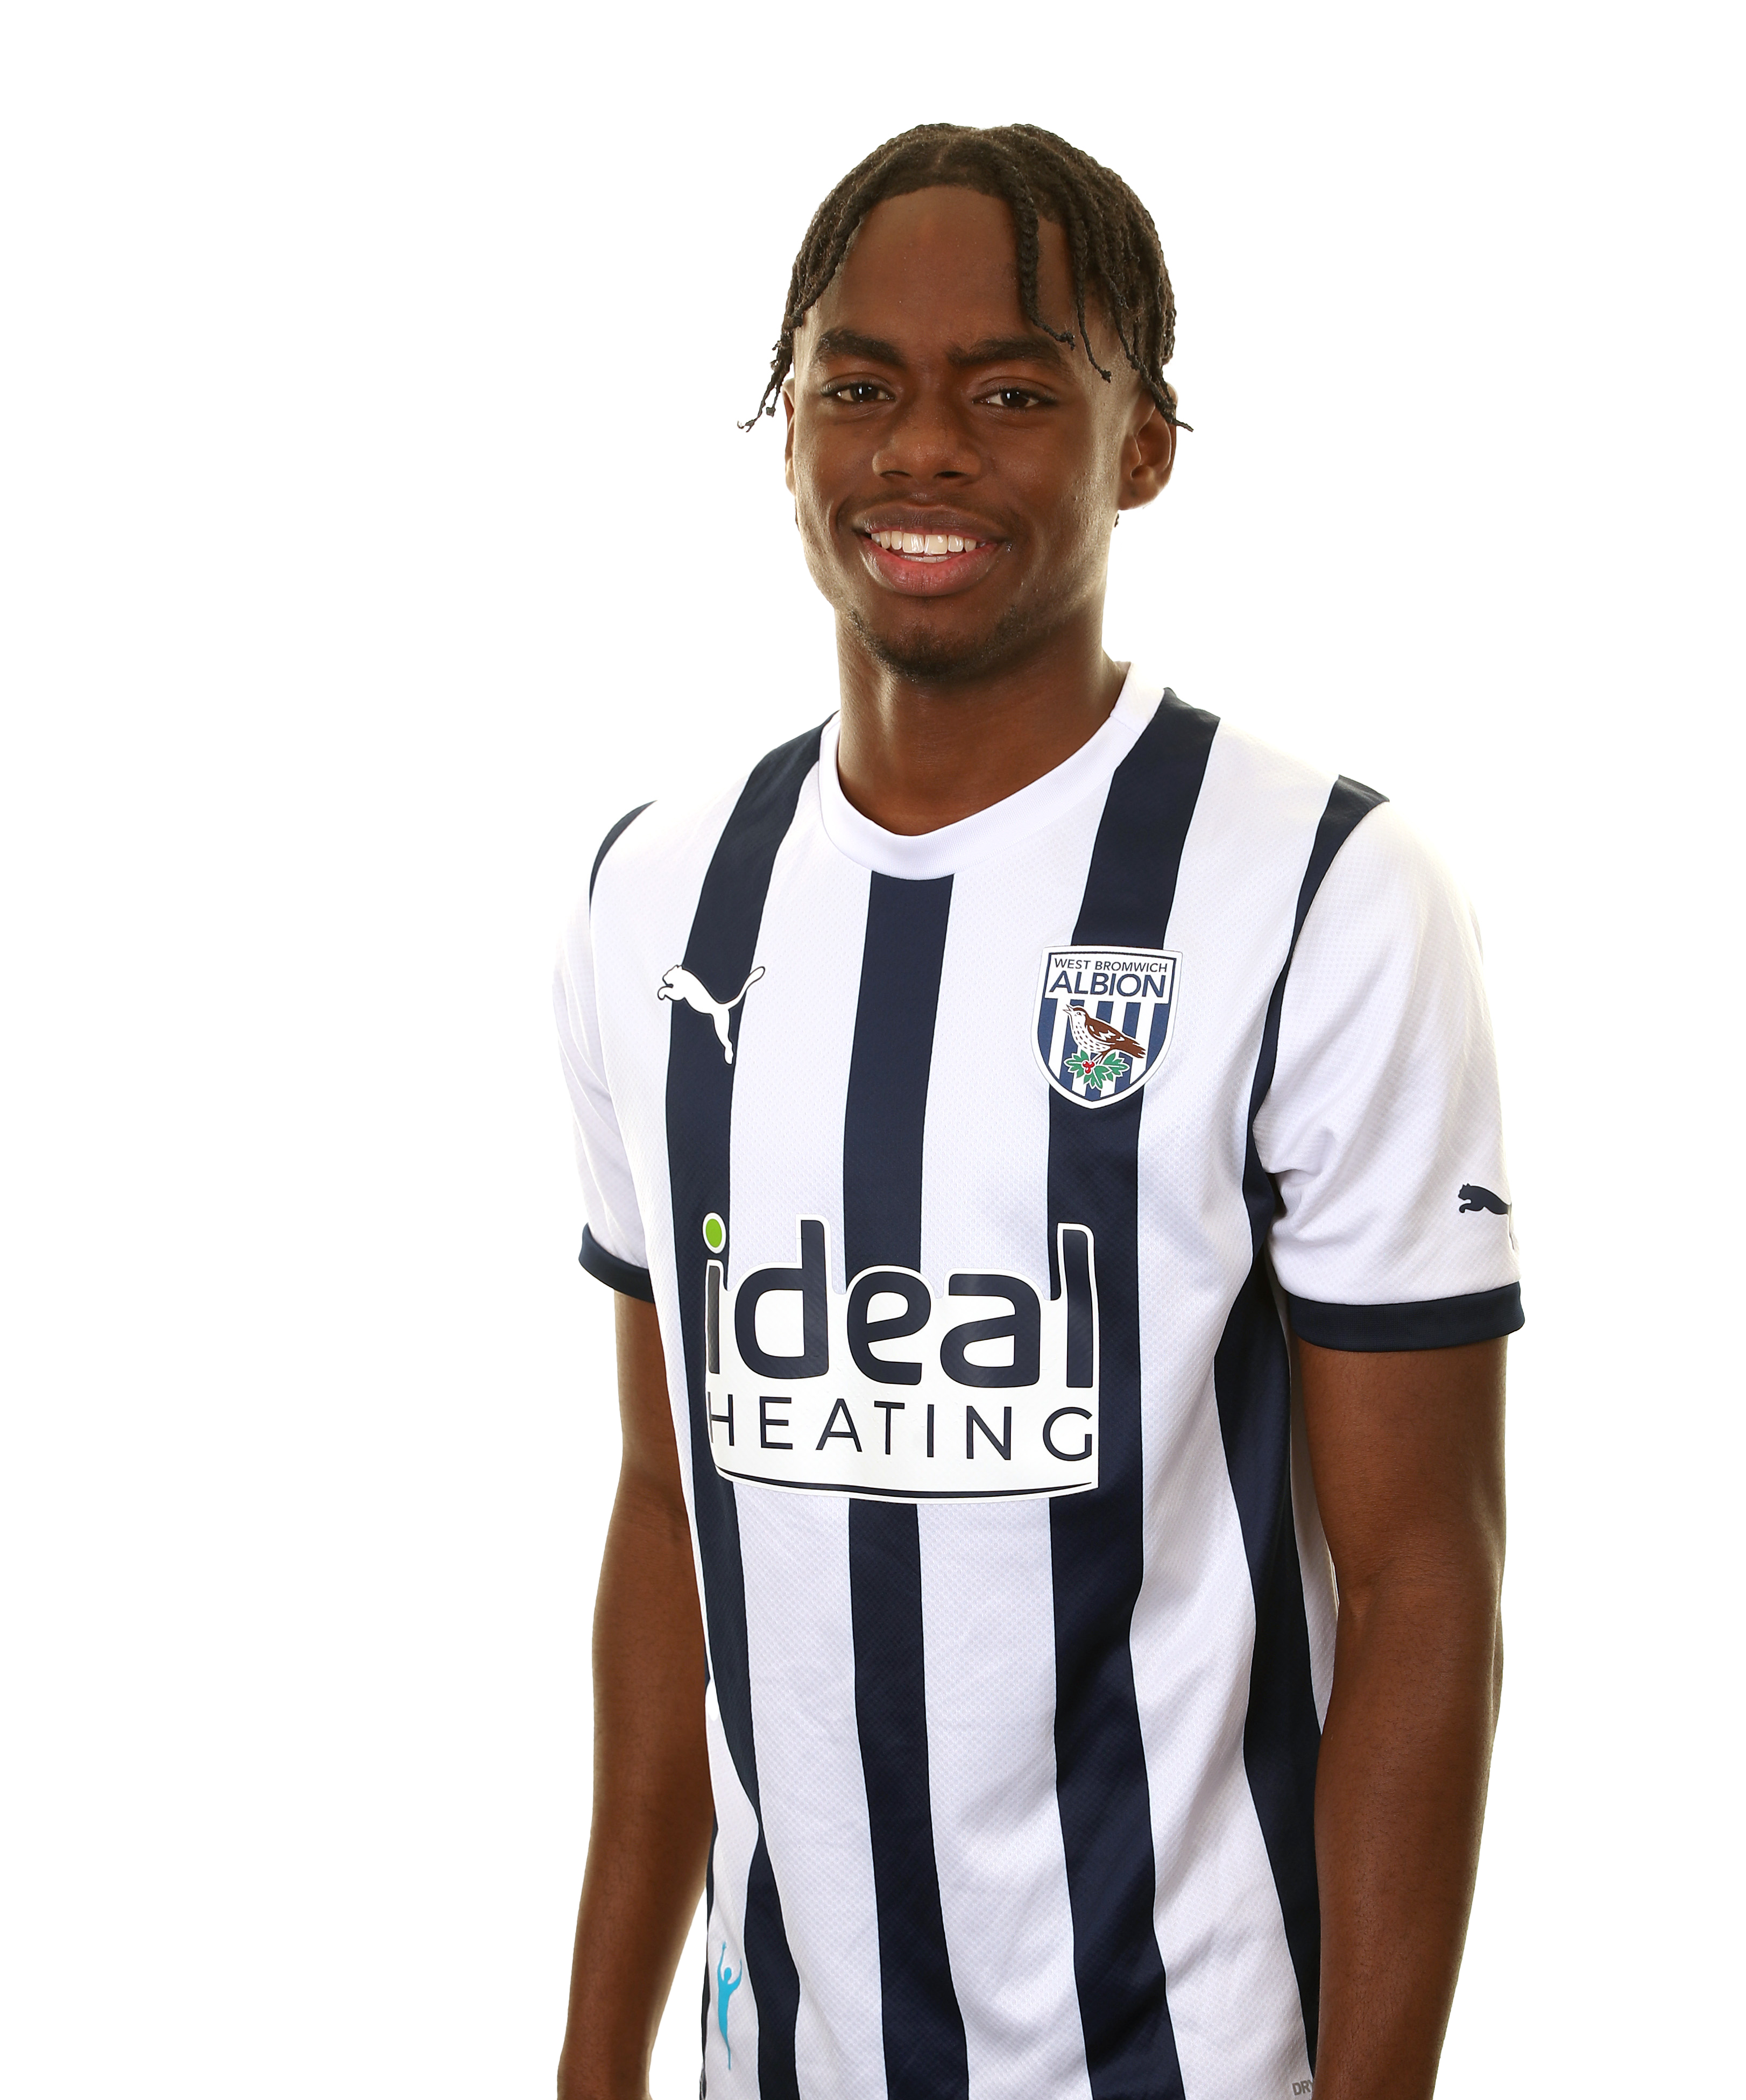 A photo headshot of Albion Under-21s player Akeel Higgins ahead of the 2023/24 season